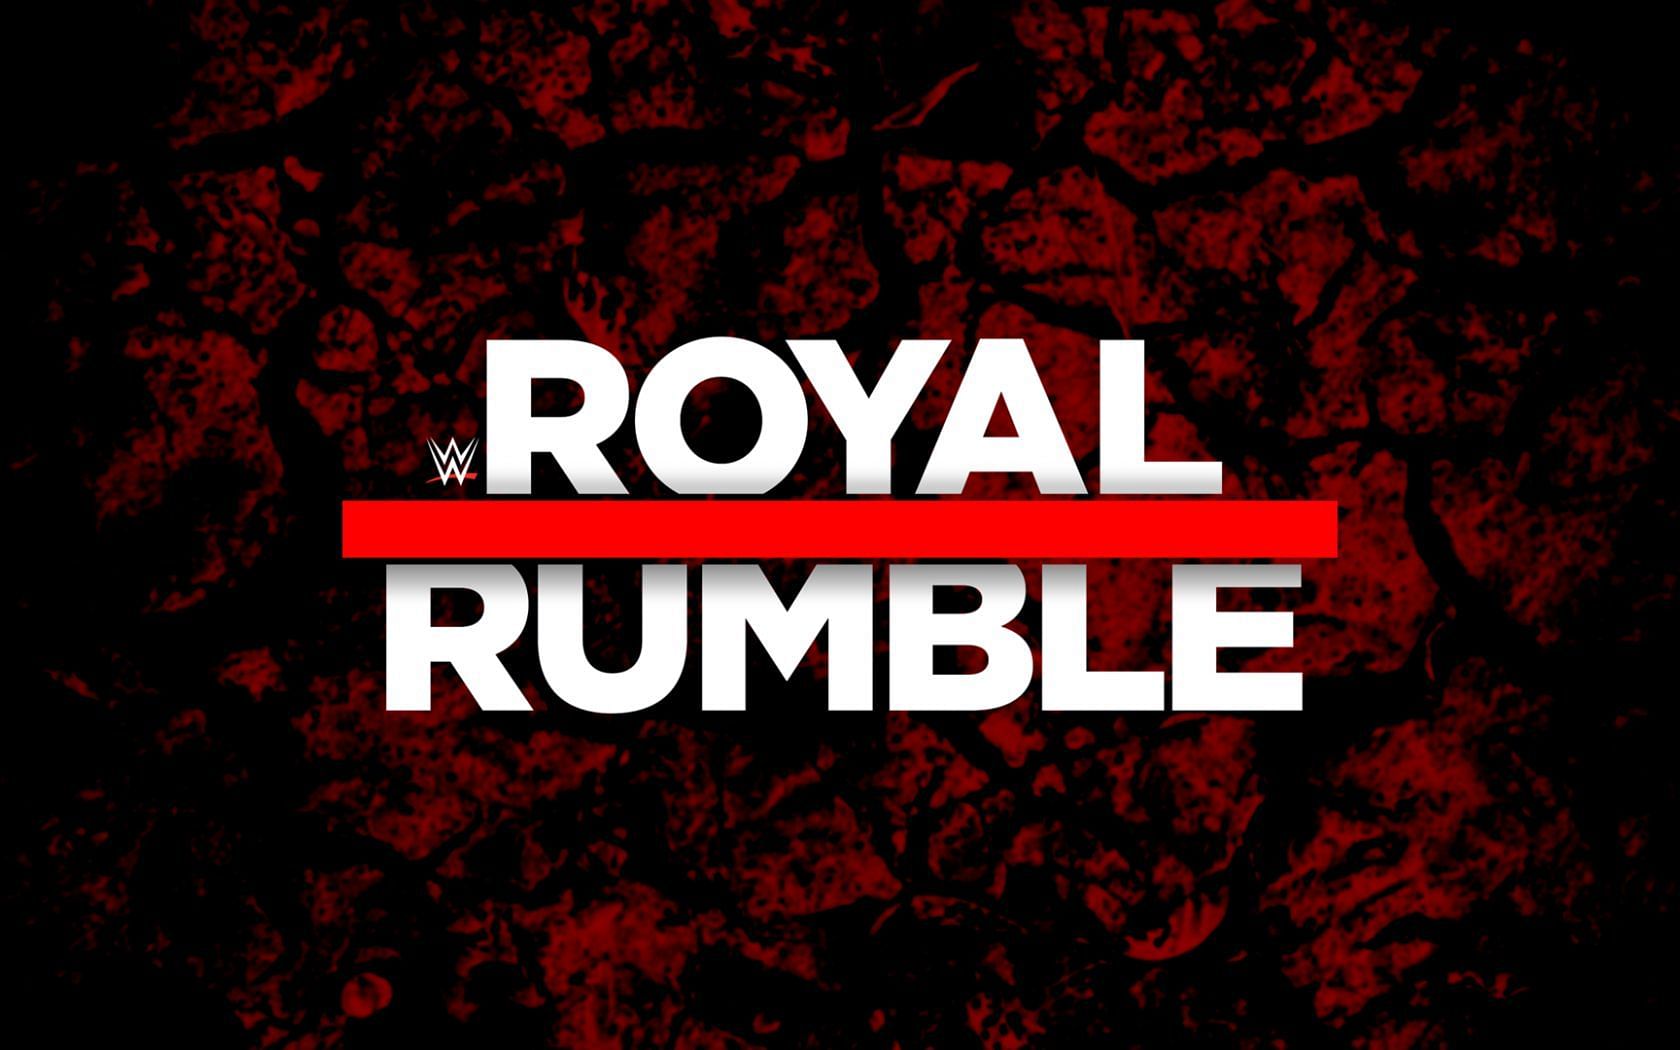 Royal Rumble is the most exciting event of the year for WWE